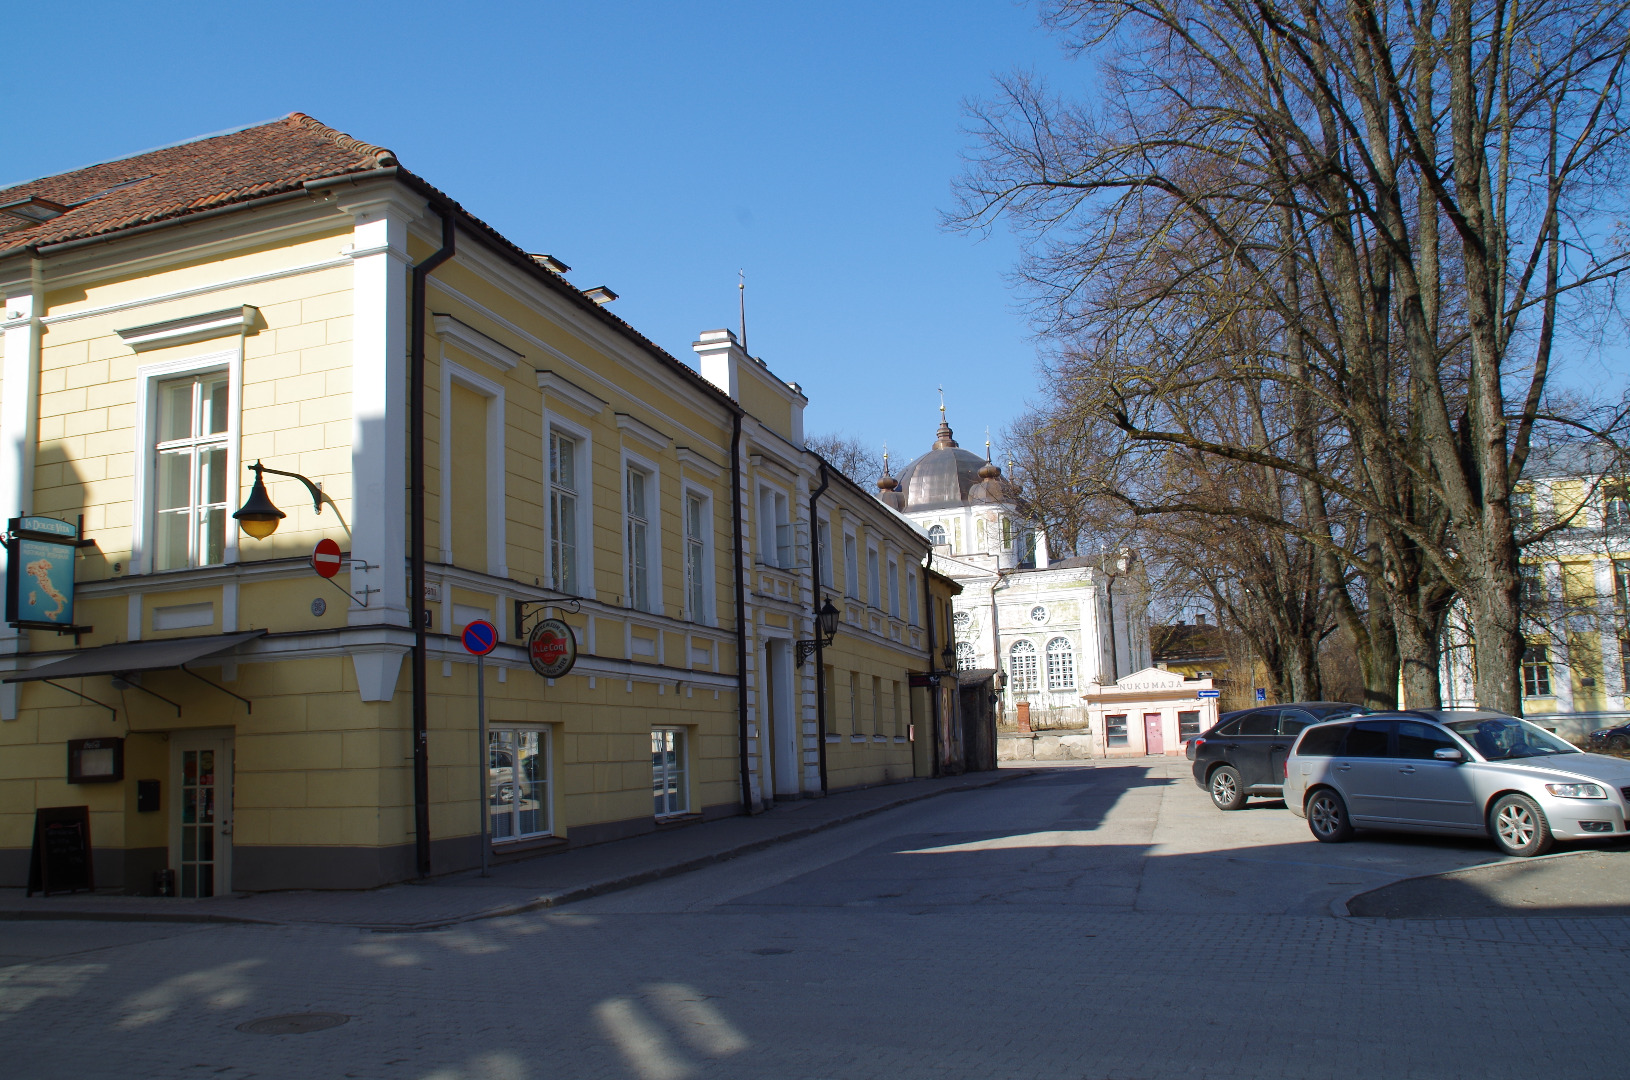 Social building in Tartu on the corner of Gildi and Company Street rephoto